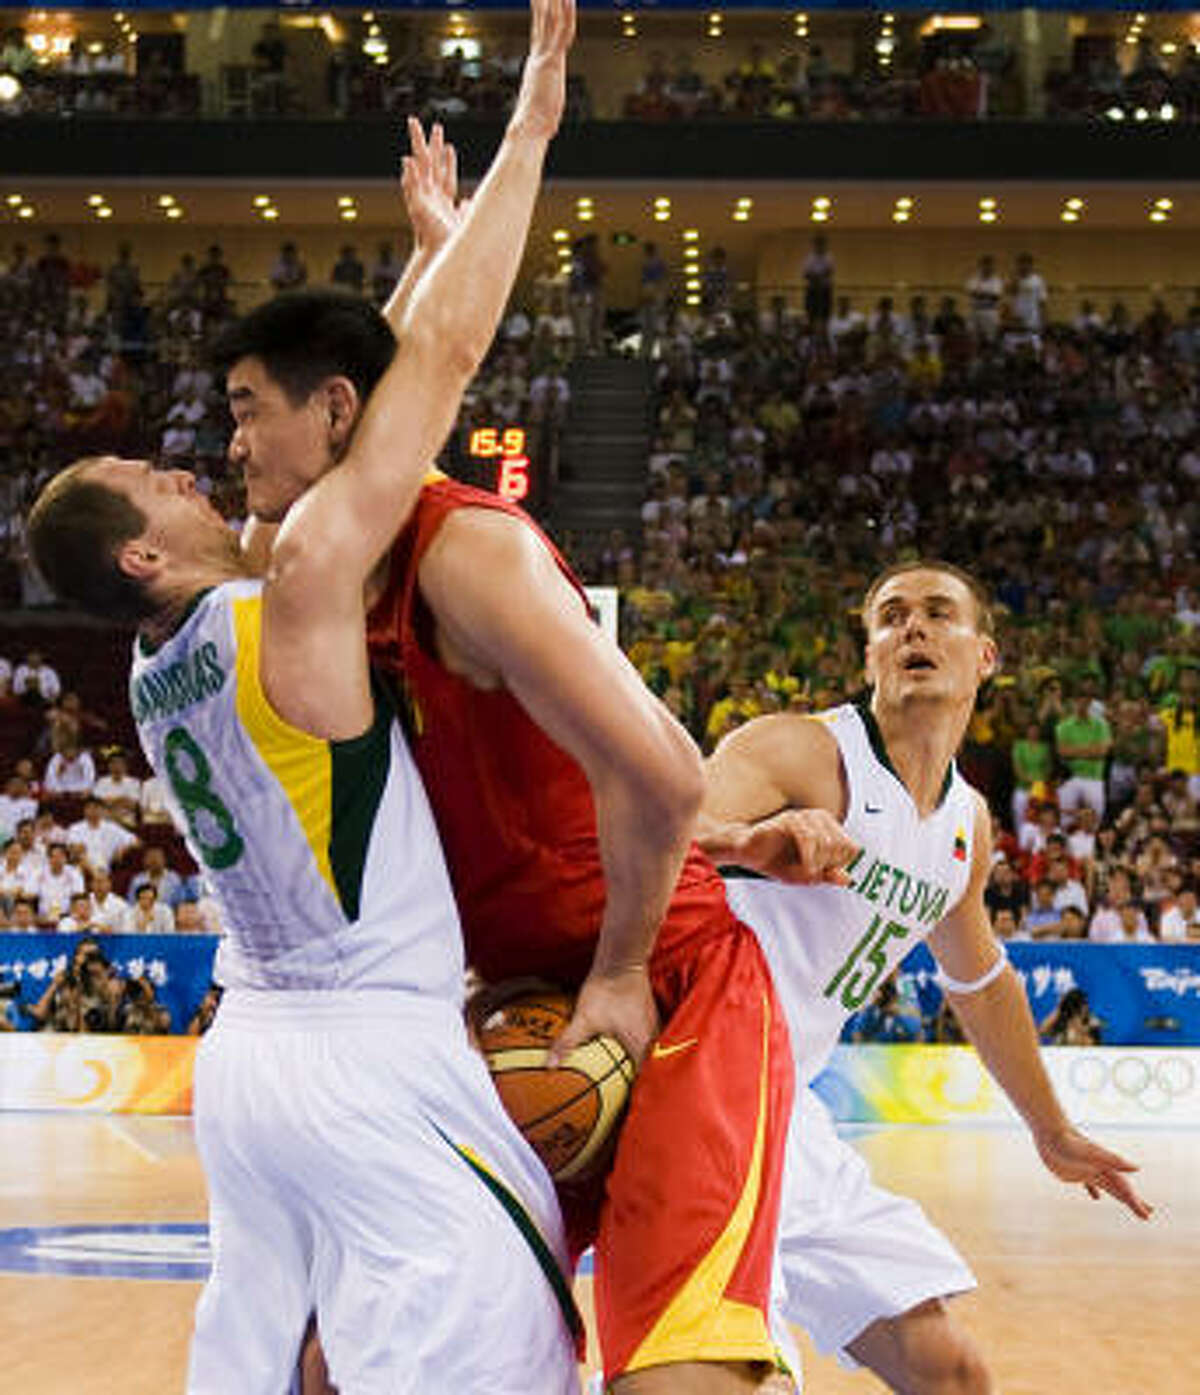 Yao Ming had 19 points in what could be his last game at the Olympics.